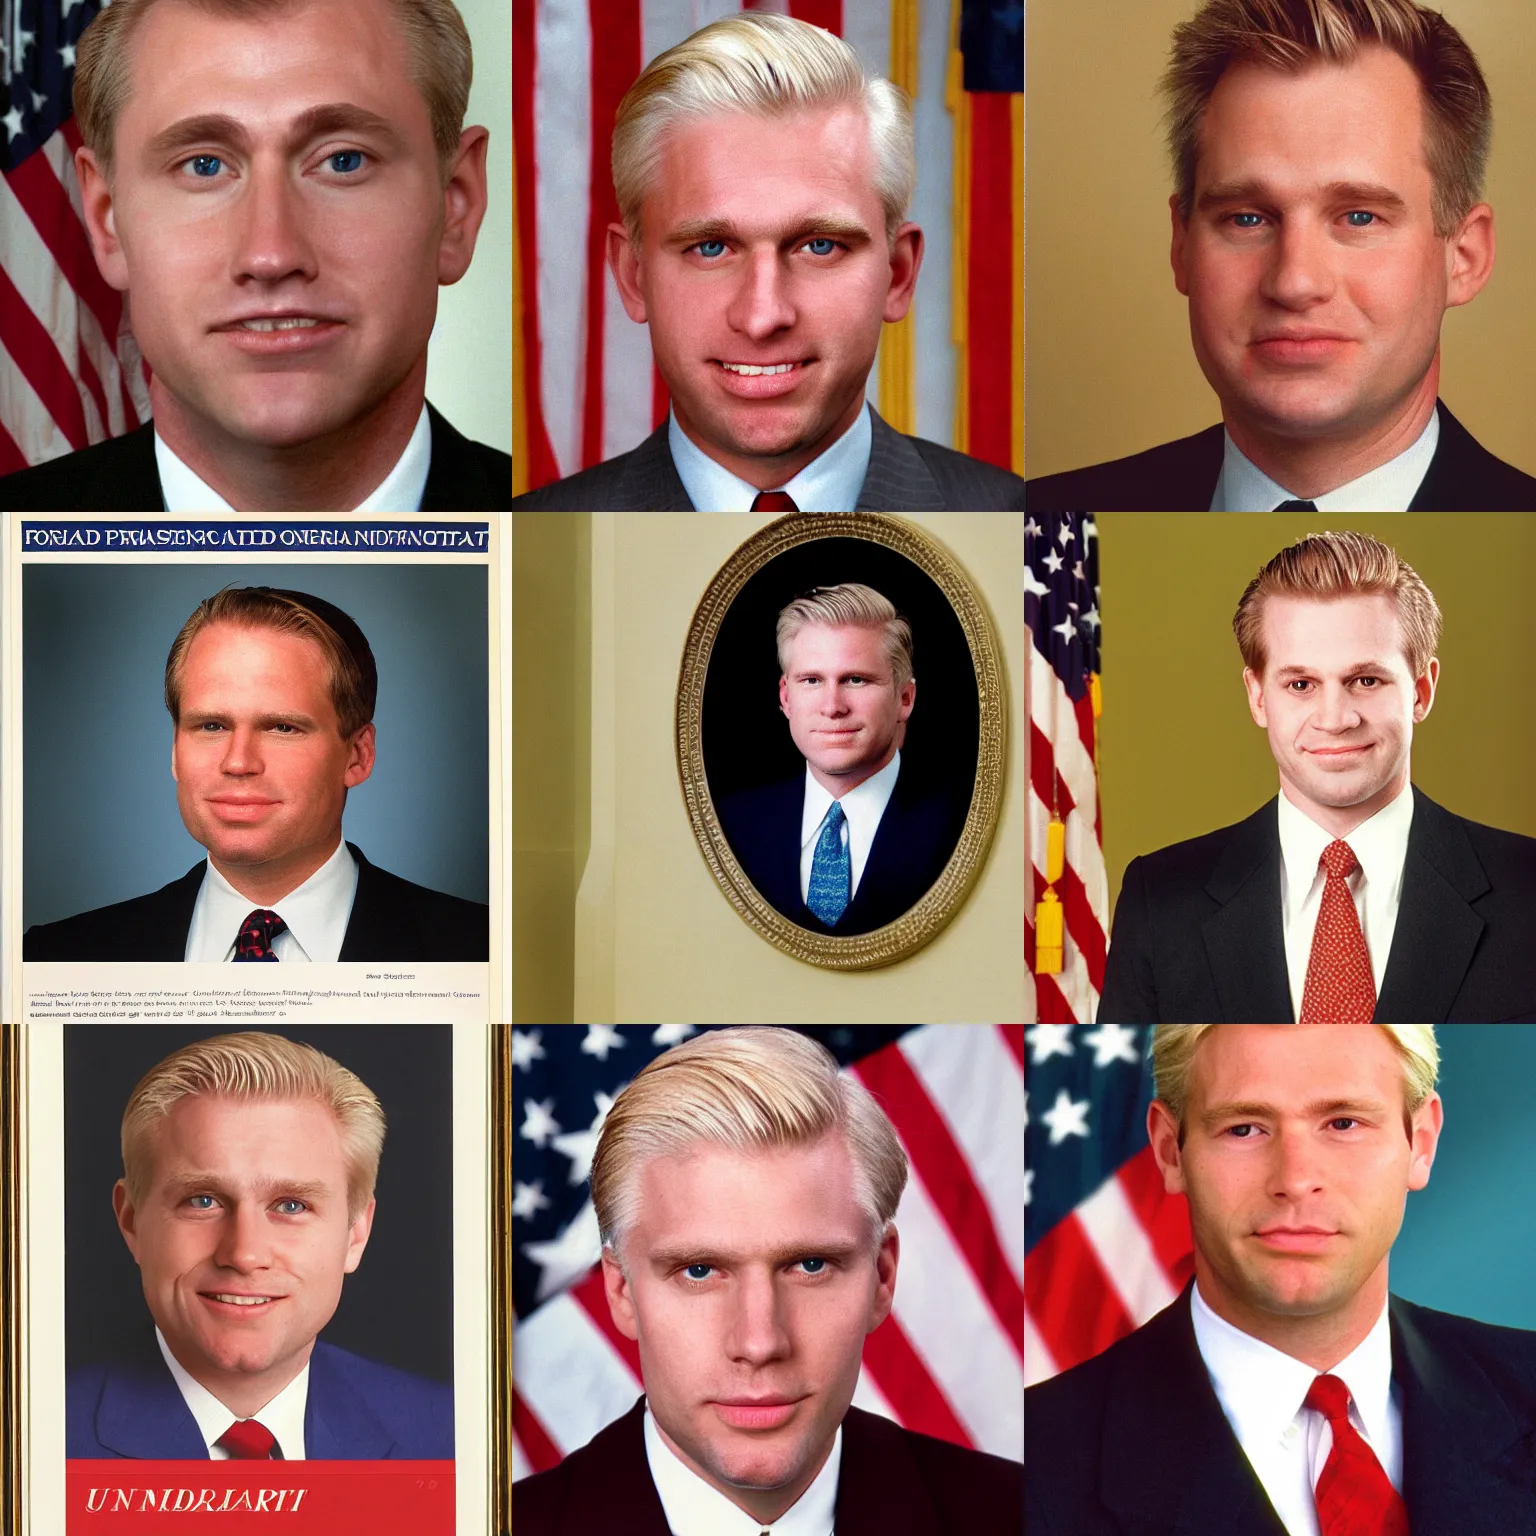 Prompt: official portrait of the united states president, 1994. He is a 35 year old white man with blond hair and a scar on his cheek.